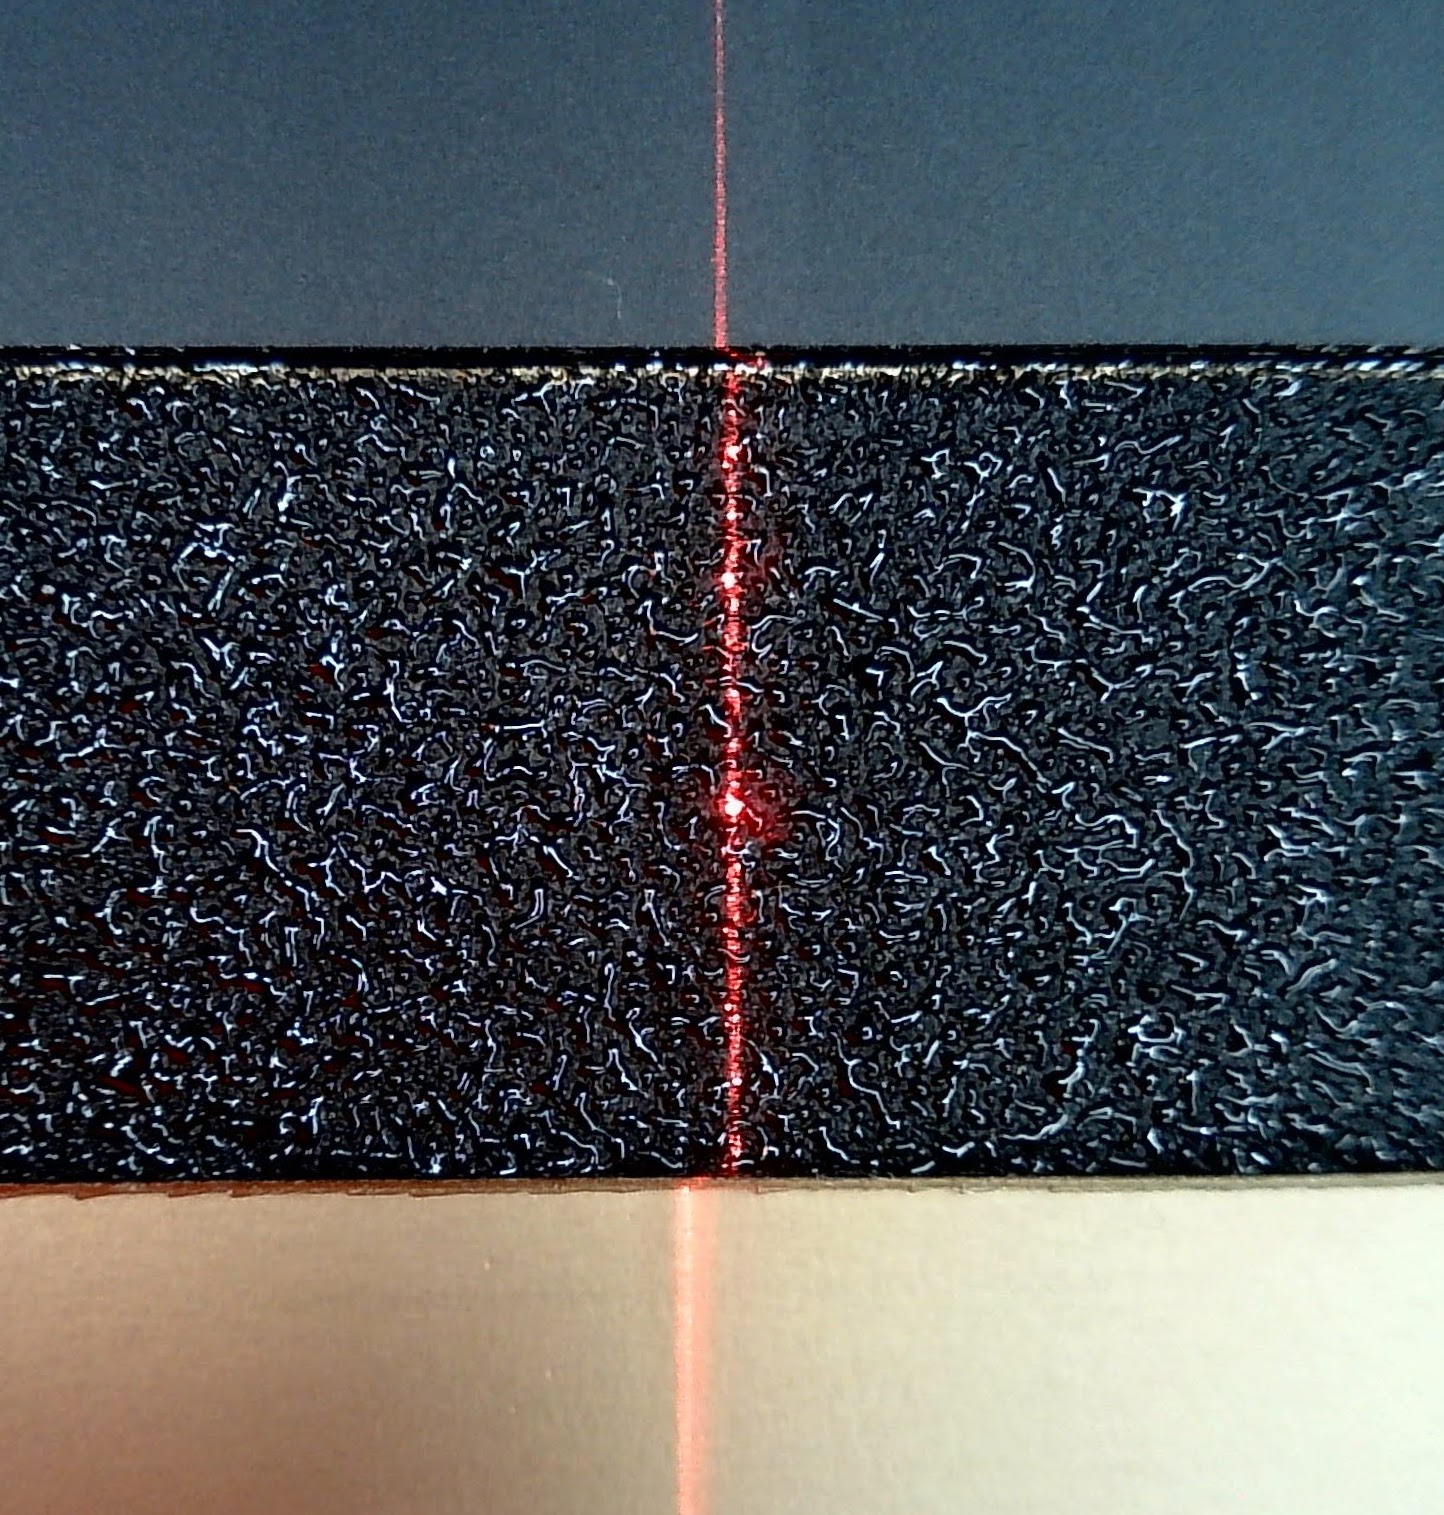 laser on the different build surfaces